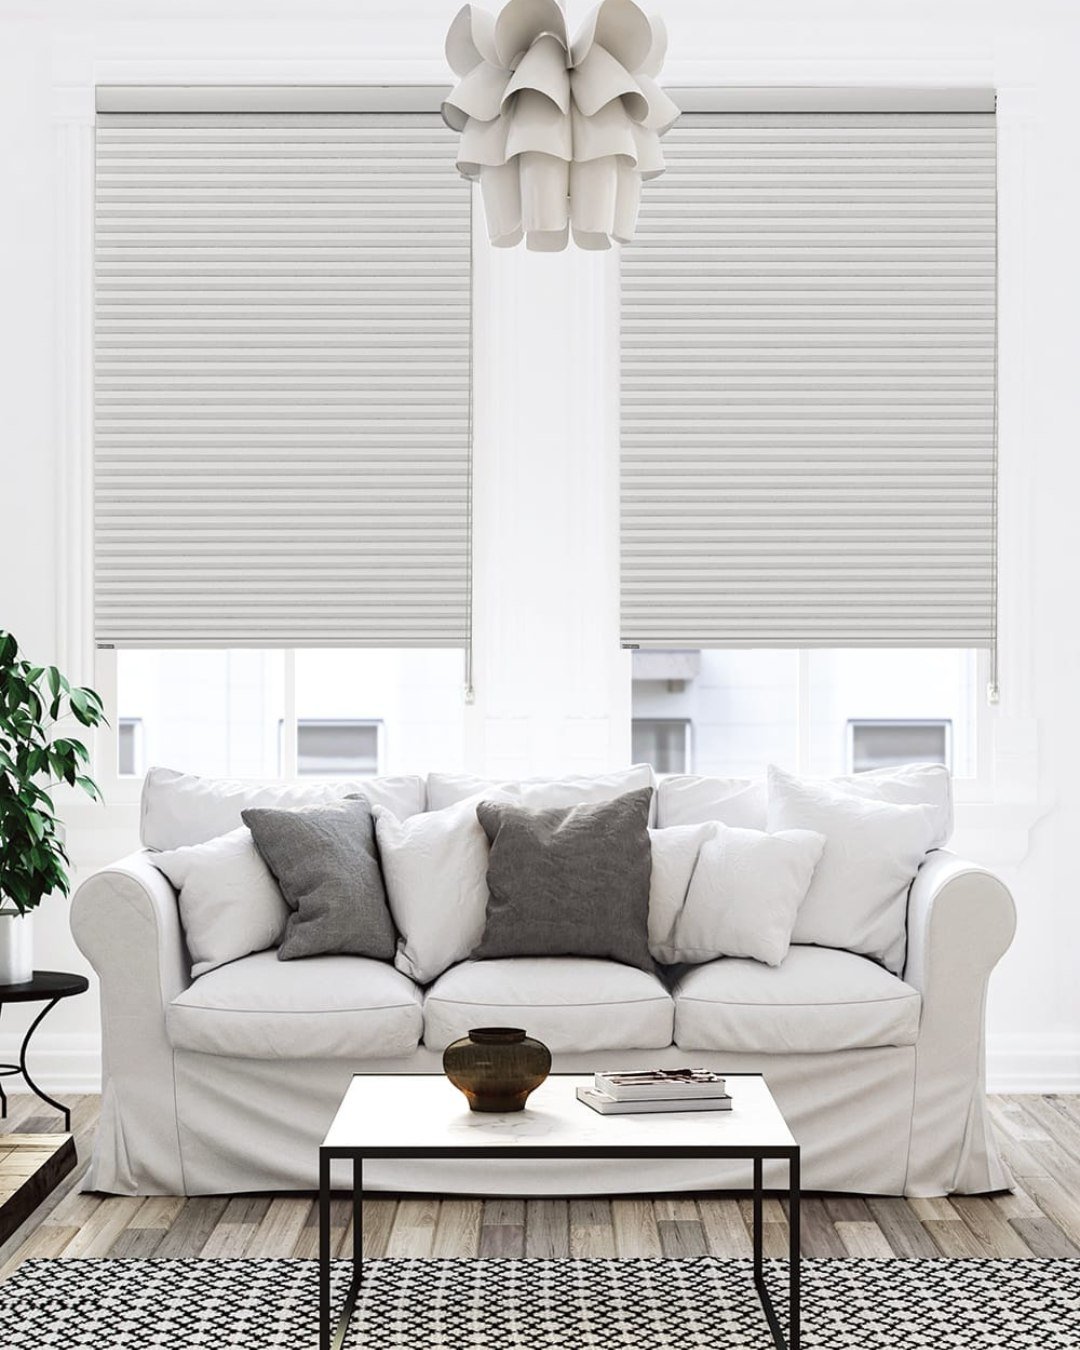 Experience enhanced safety, less light leakage and a more streamlined profile with Norman Honeycomb Shades. 

The award-winning system adjusts from the top and bottom and has no cords in the middle. When closed, the SmartFit fabric stack creates a sm